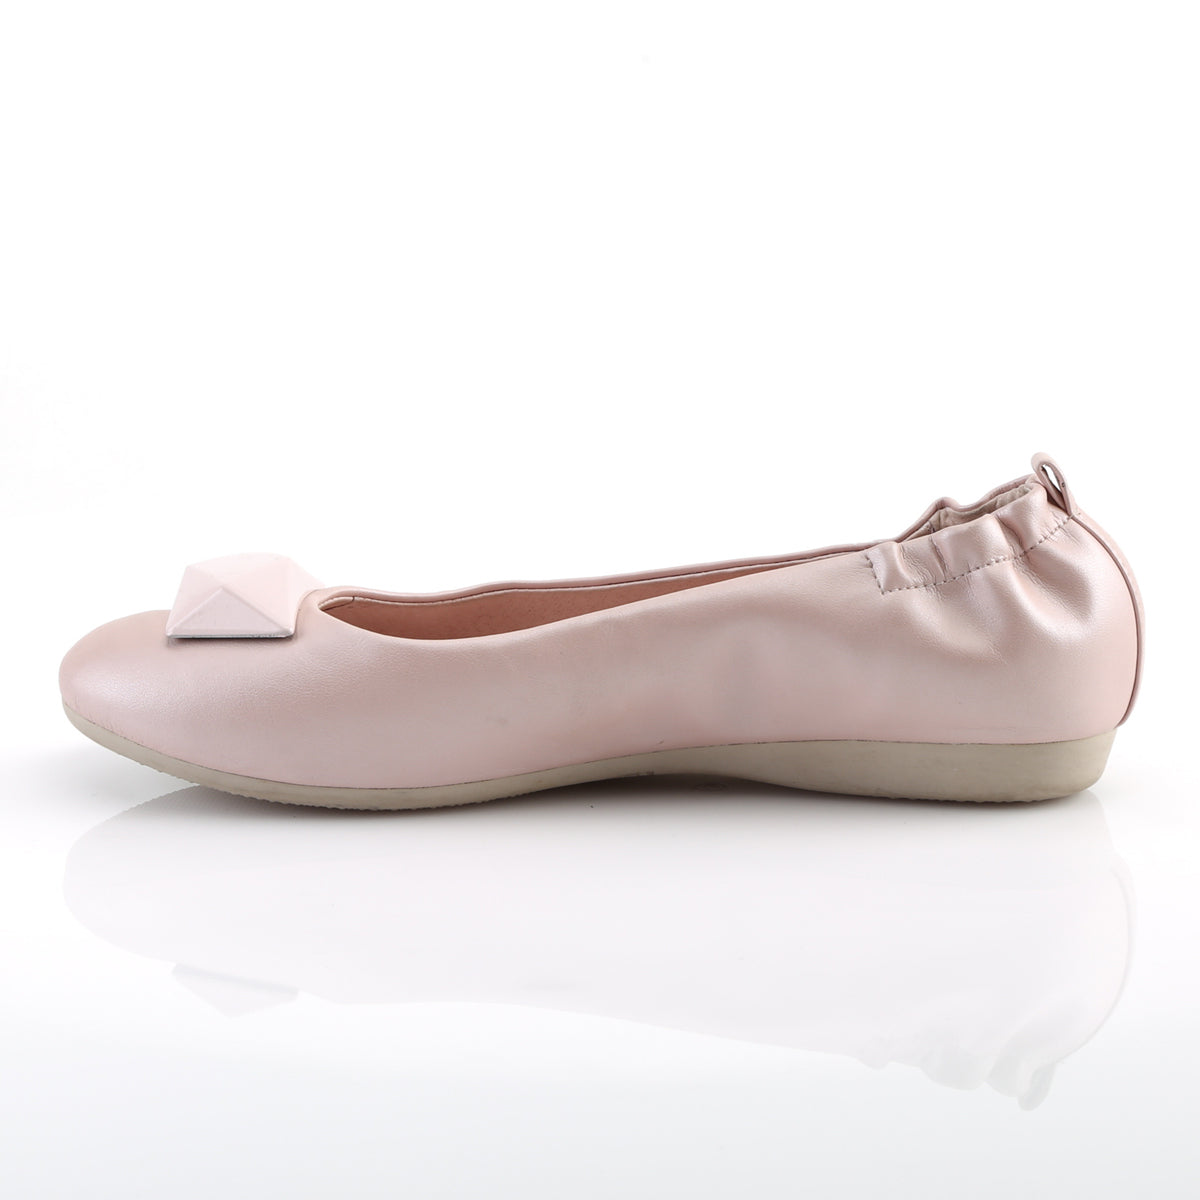 OLIVE-08 Pin Up Couture B Pink Faux Leather Single Soles [Retro Glamour Shoes]